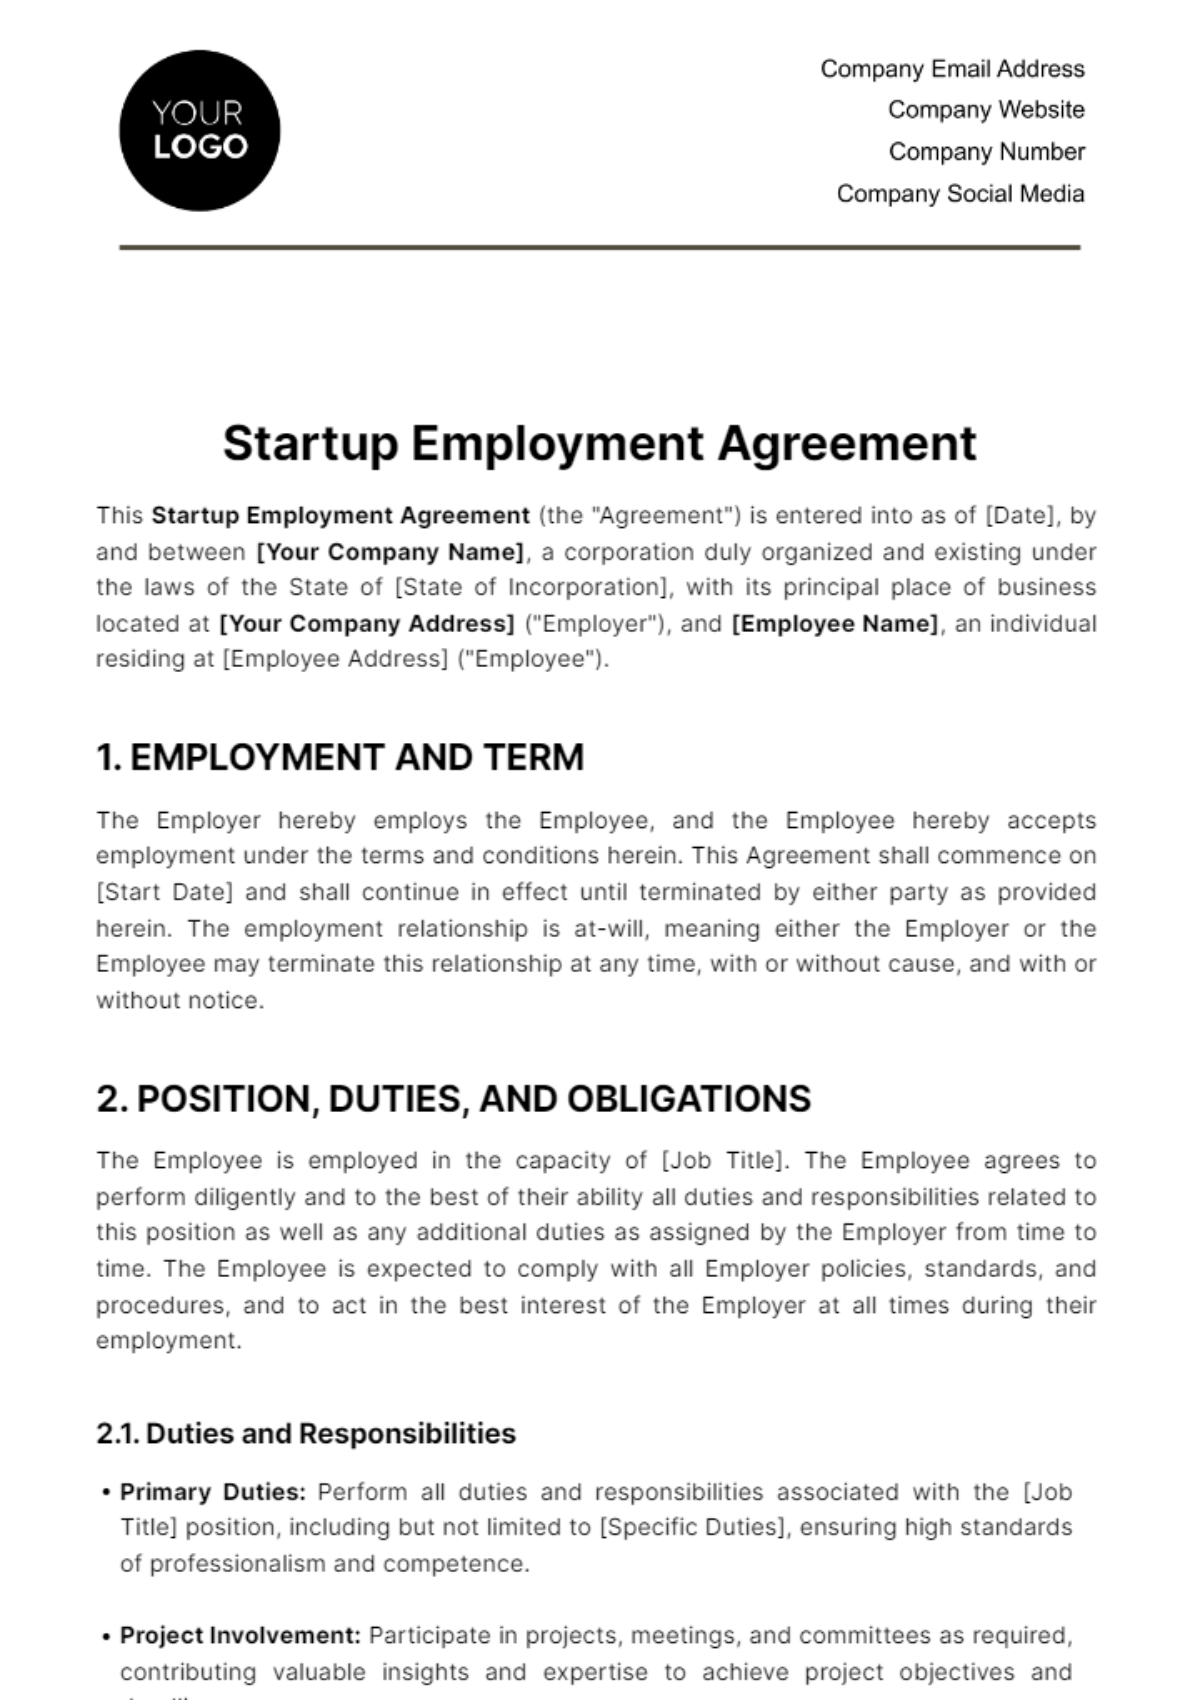 Free Startup Employment Agreement Template